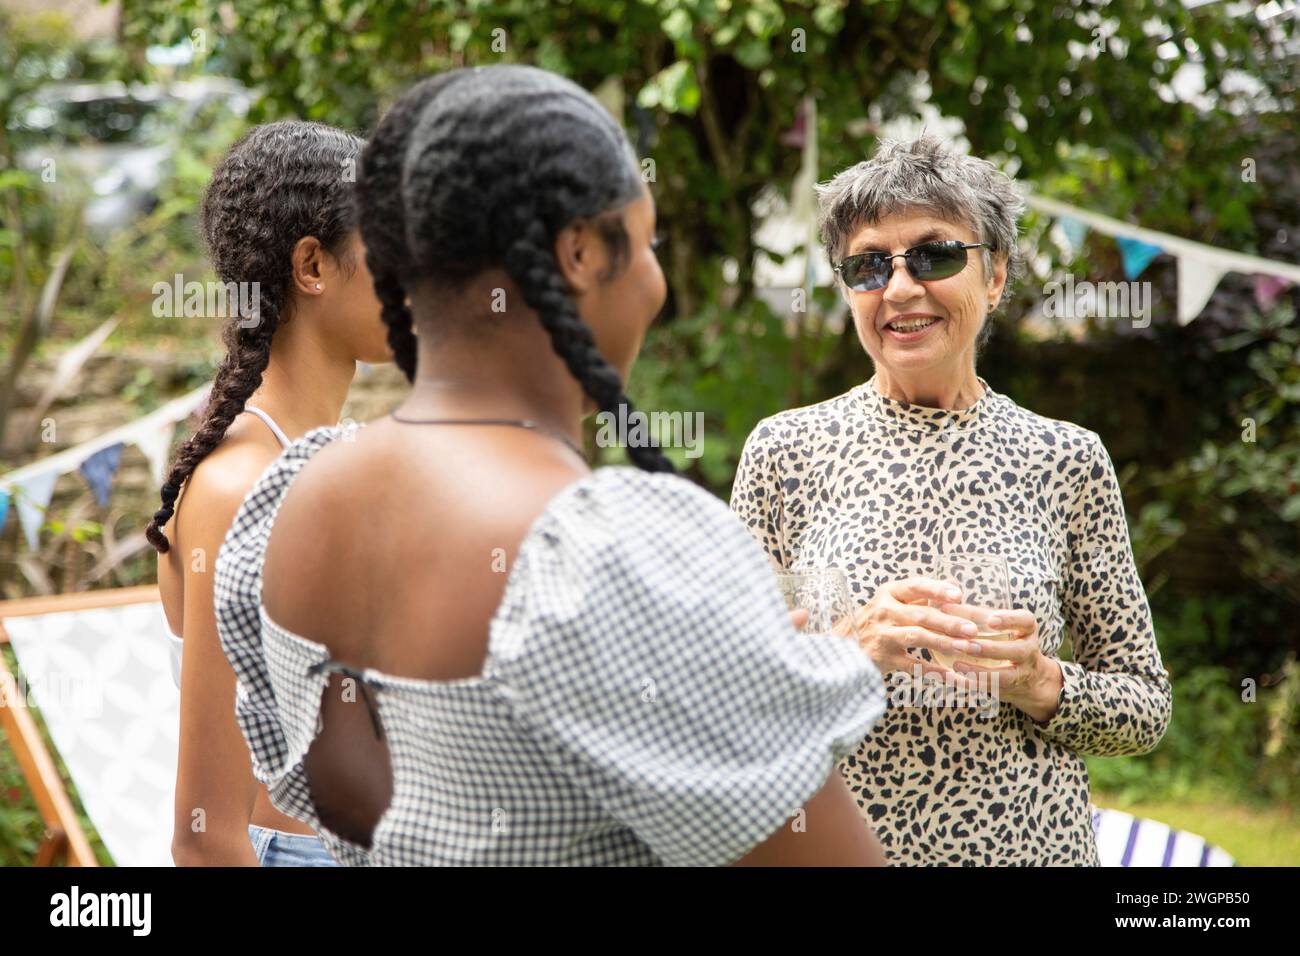 A mature white woman chats and laughs with two young black women at a garden party Stock Photo